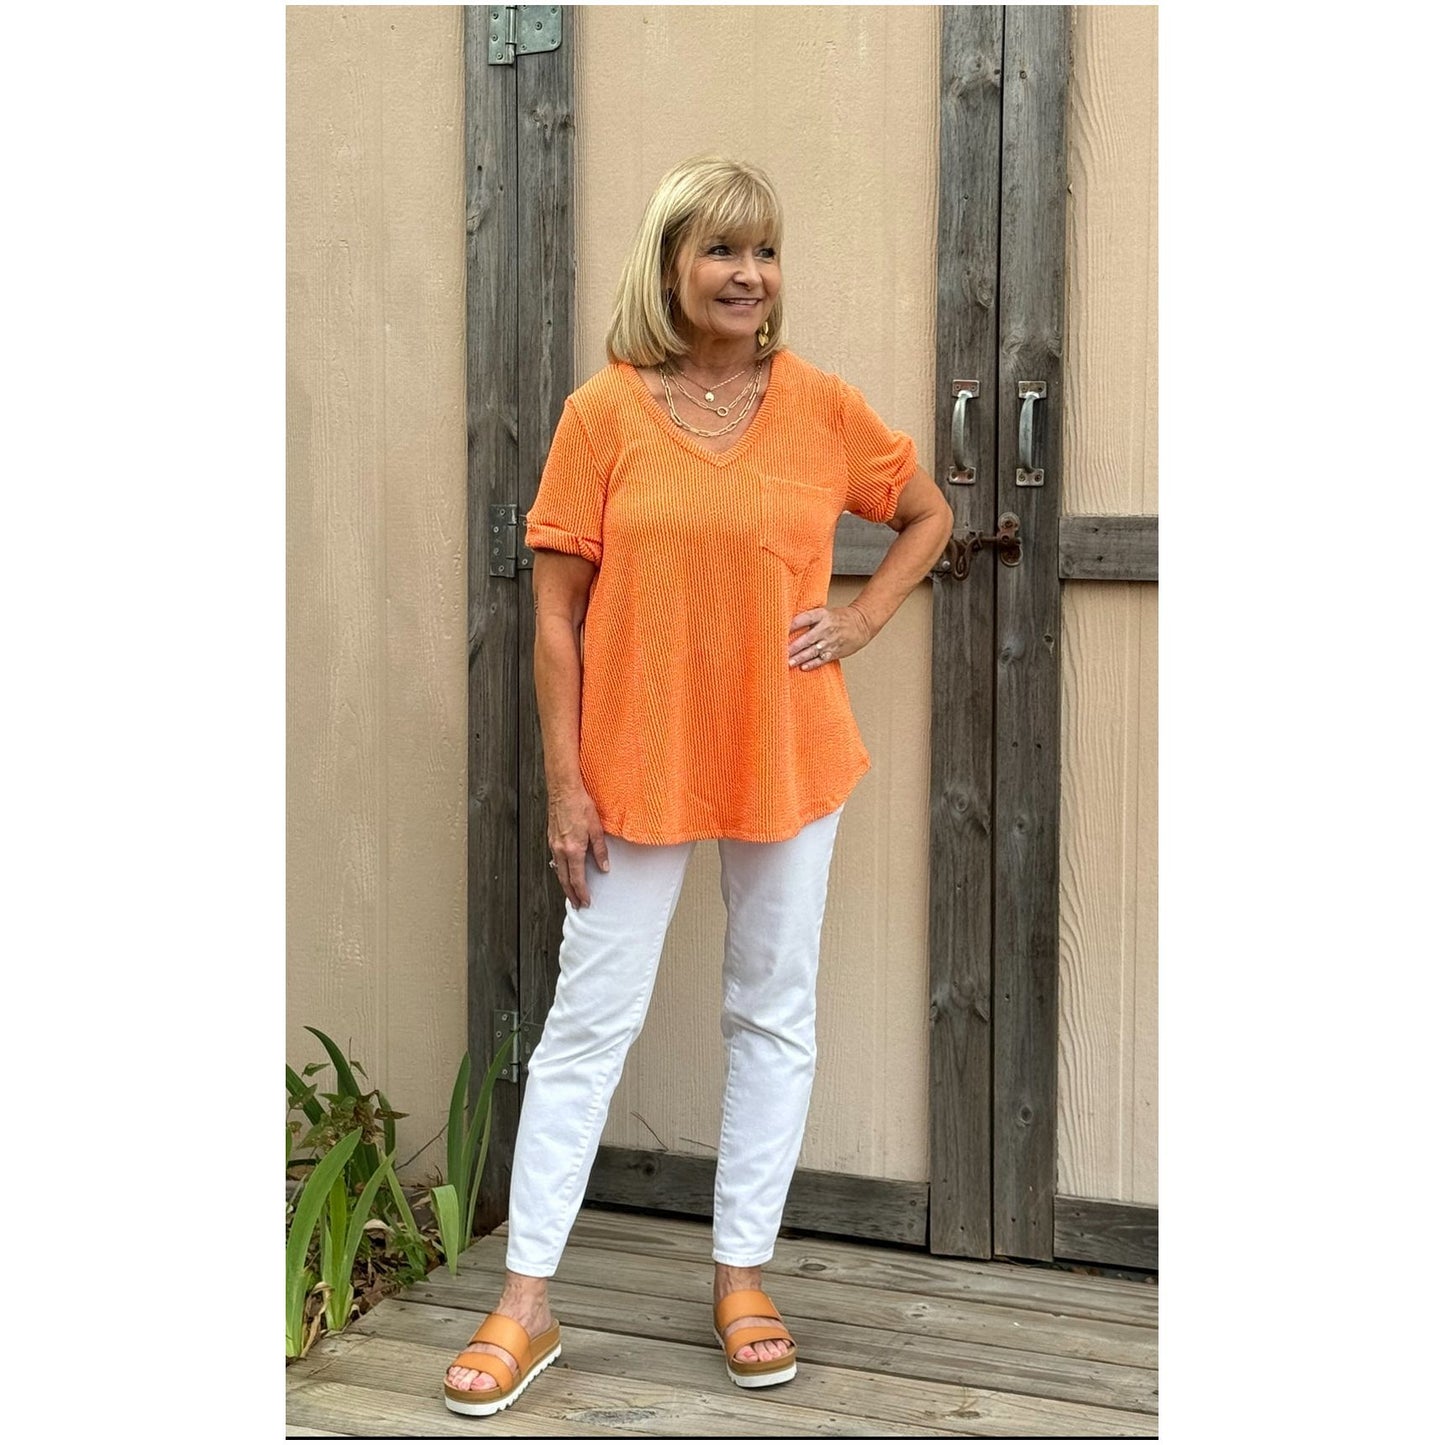 The Kinsley Orange Ribbed Knit Top